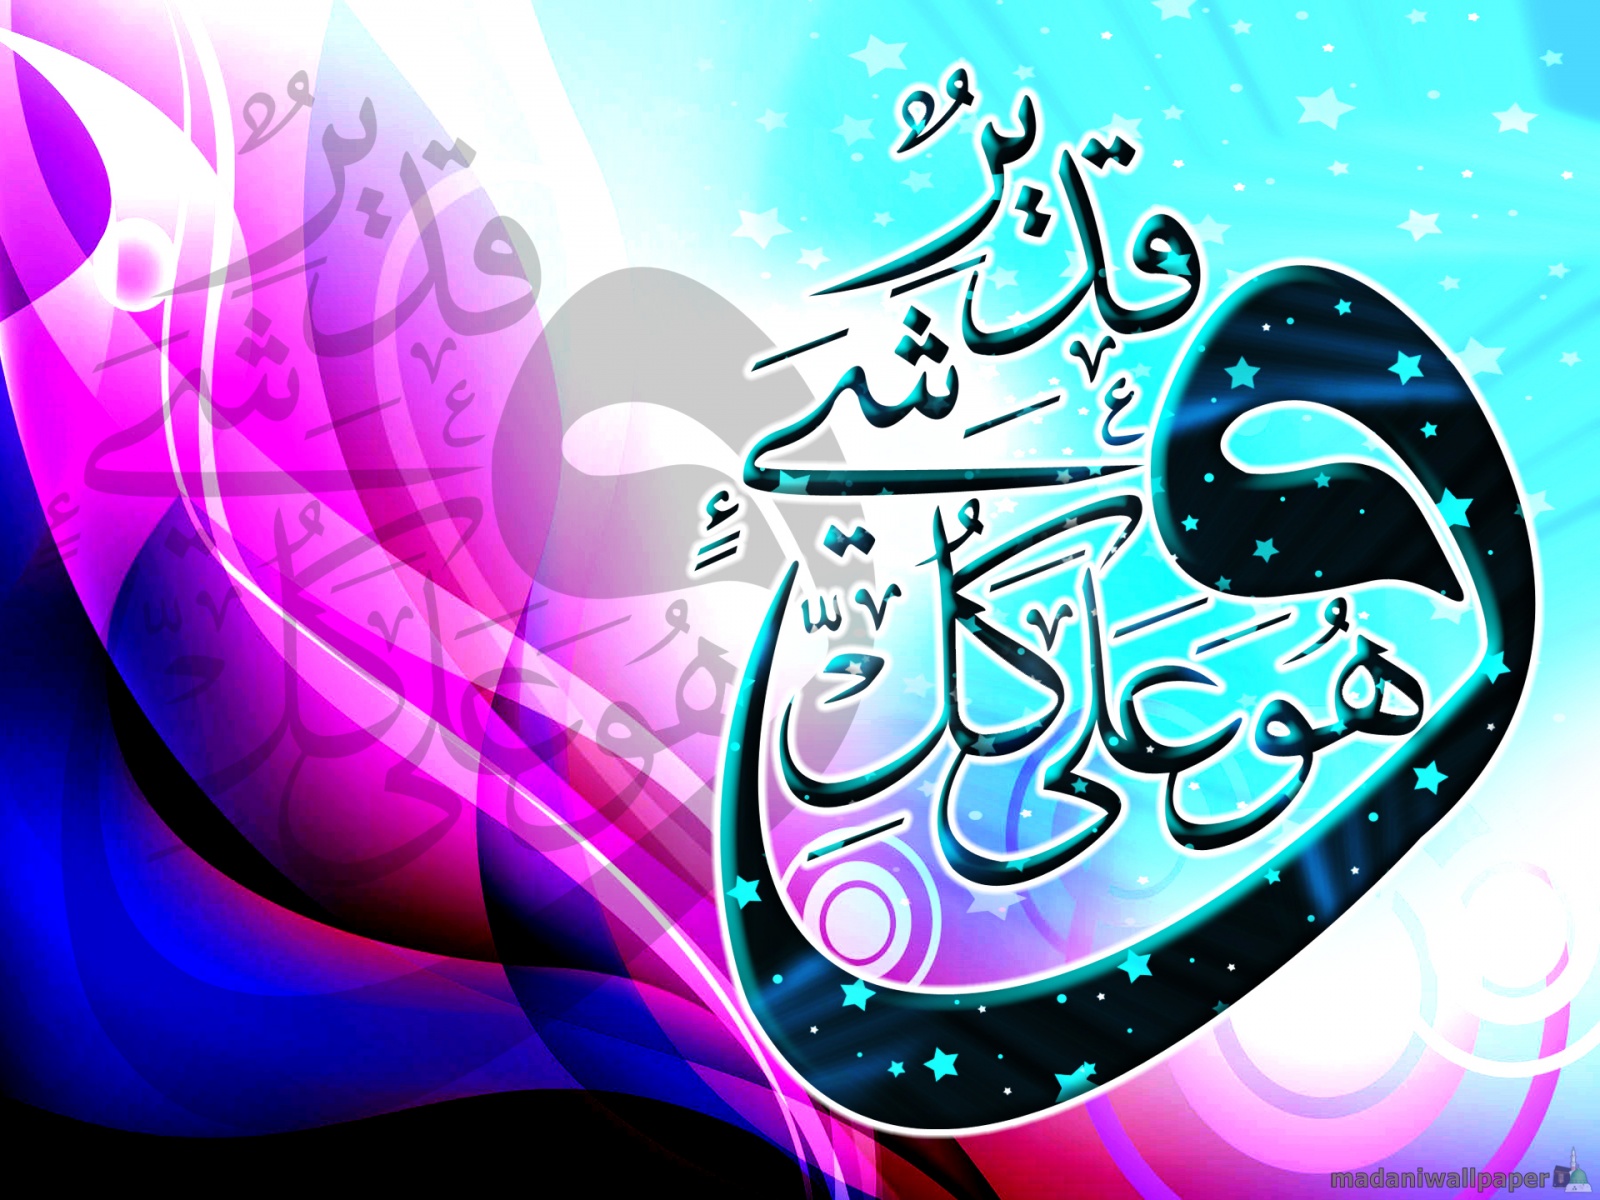 Islamic Calligraphy Wallpaper 2013 HD large resolution desktop picture